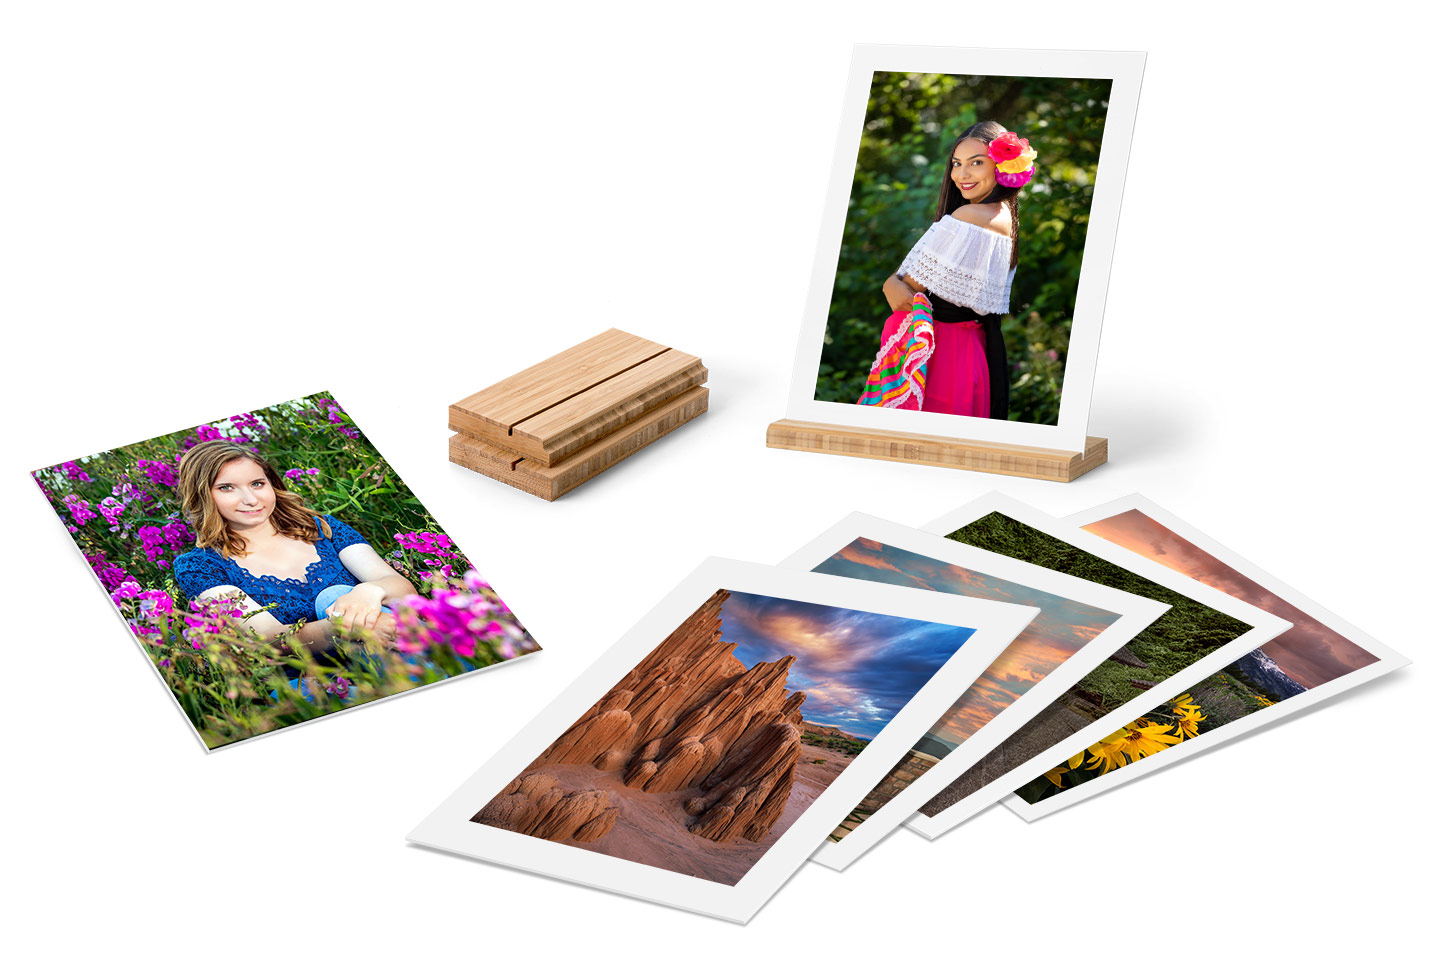 Gallery Boards feature your images or artwork printed on 4-ply textured mat board made from 100% recyled content.